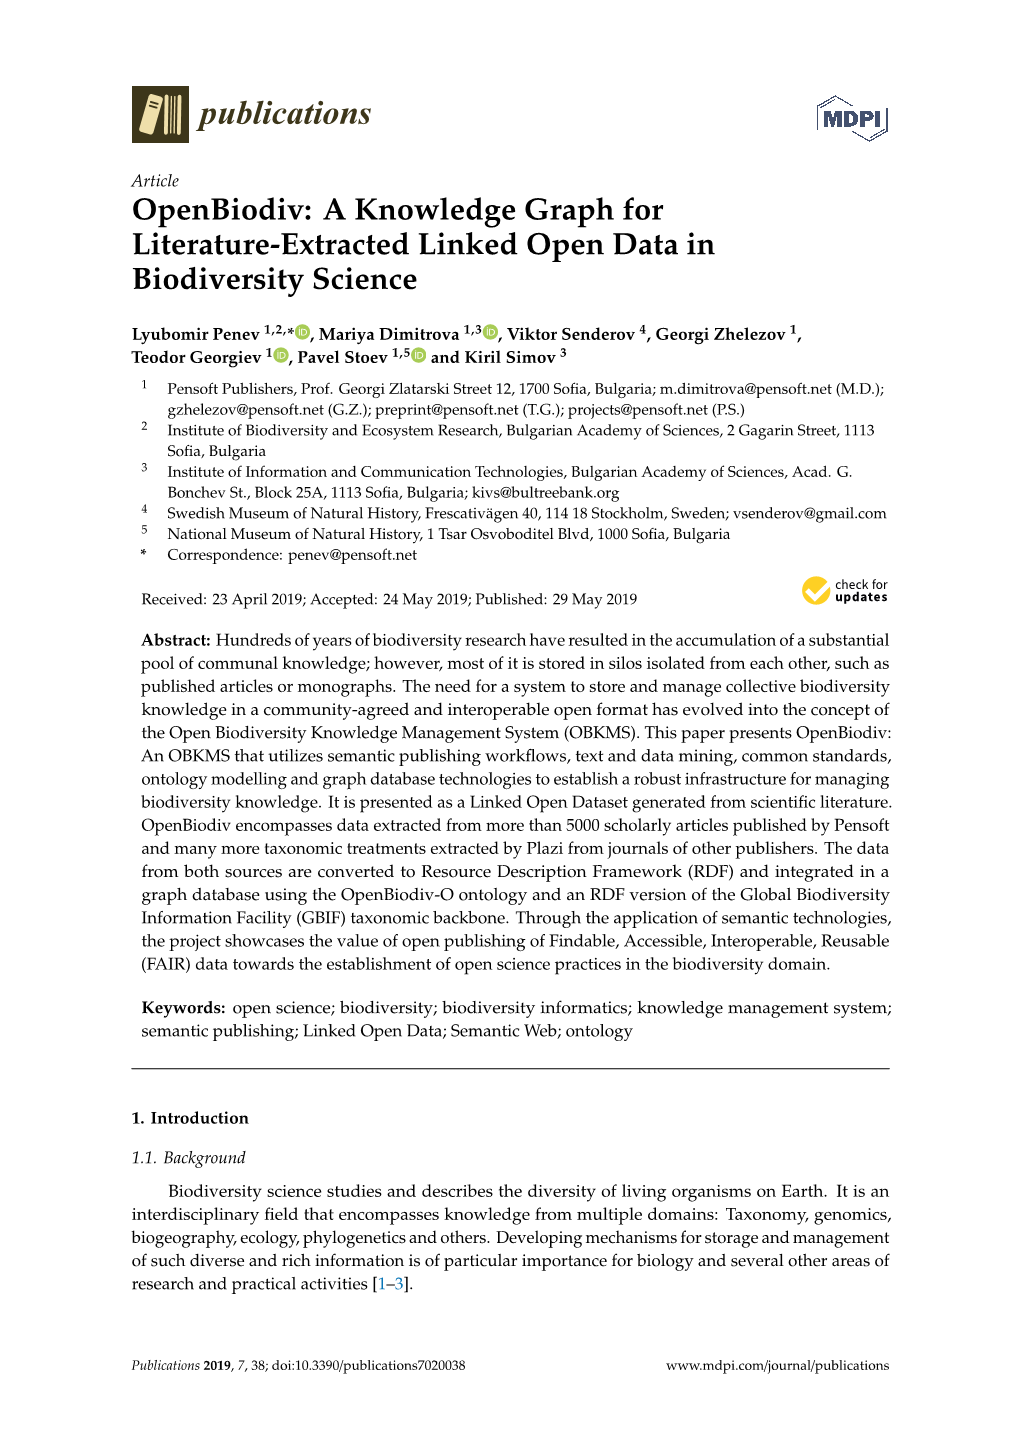 A Knowledge Graph for Literature-Extracted Linked Open Data in Biodiversity Science